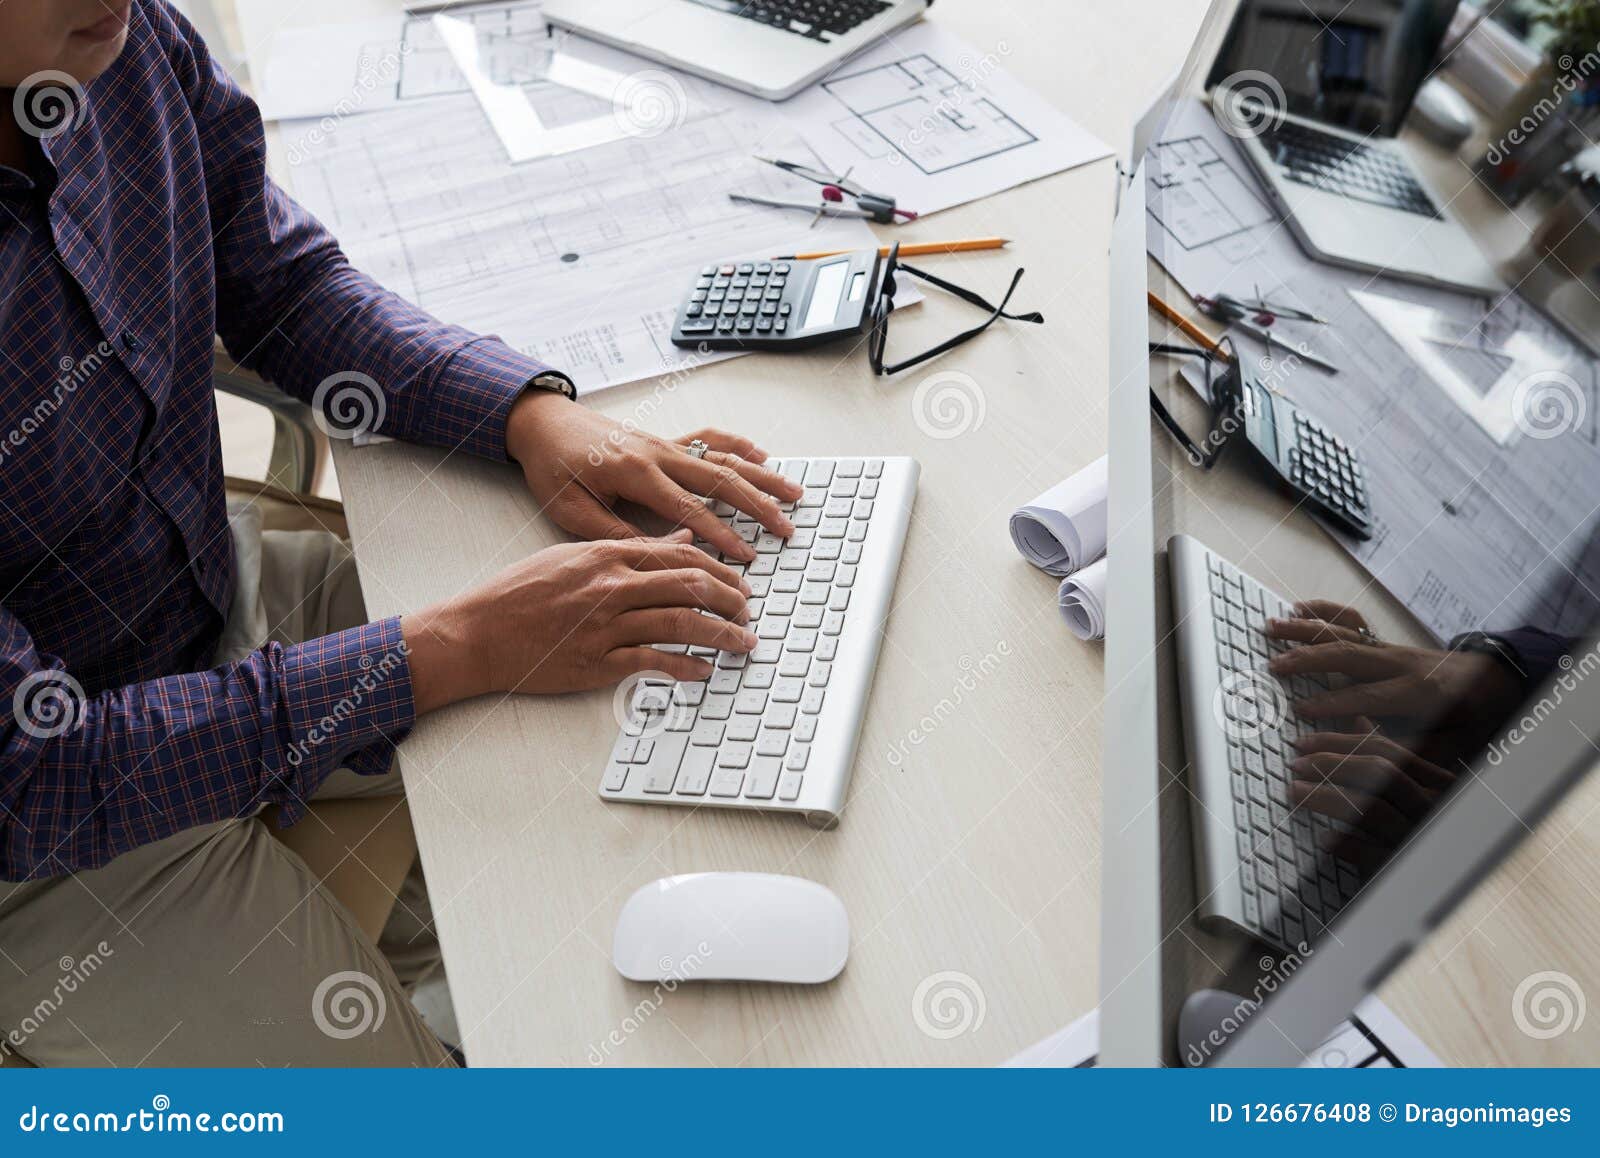 Engineer busy with work stock photo. Image of male, professional - 126676408